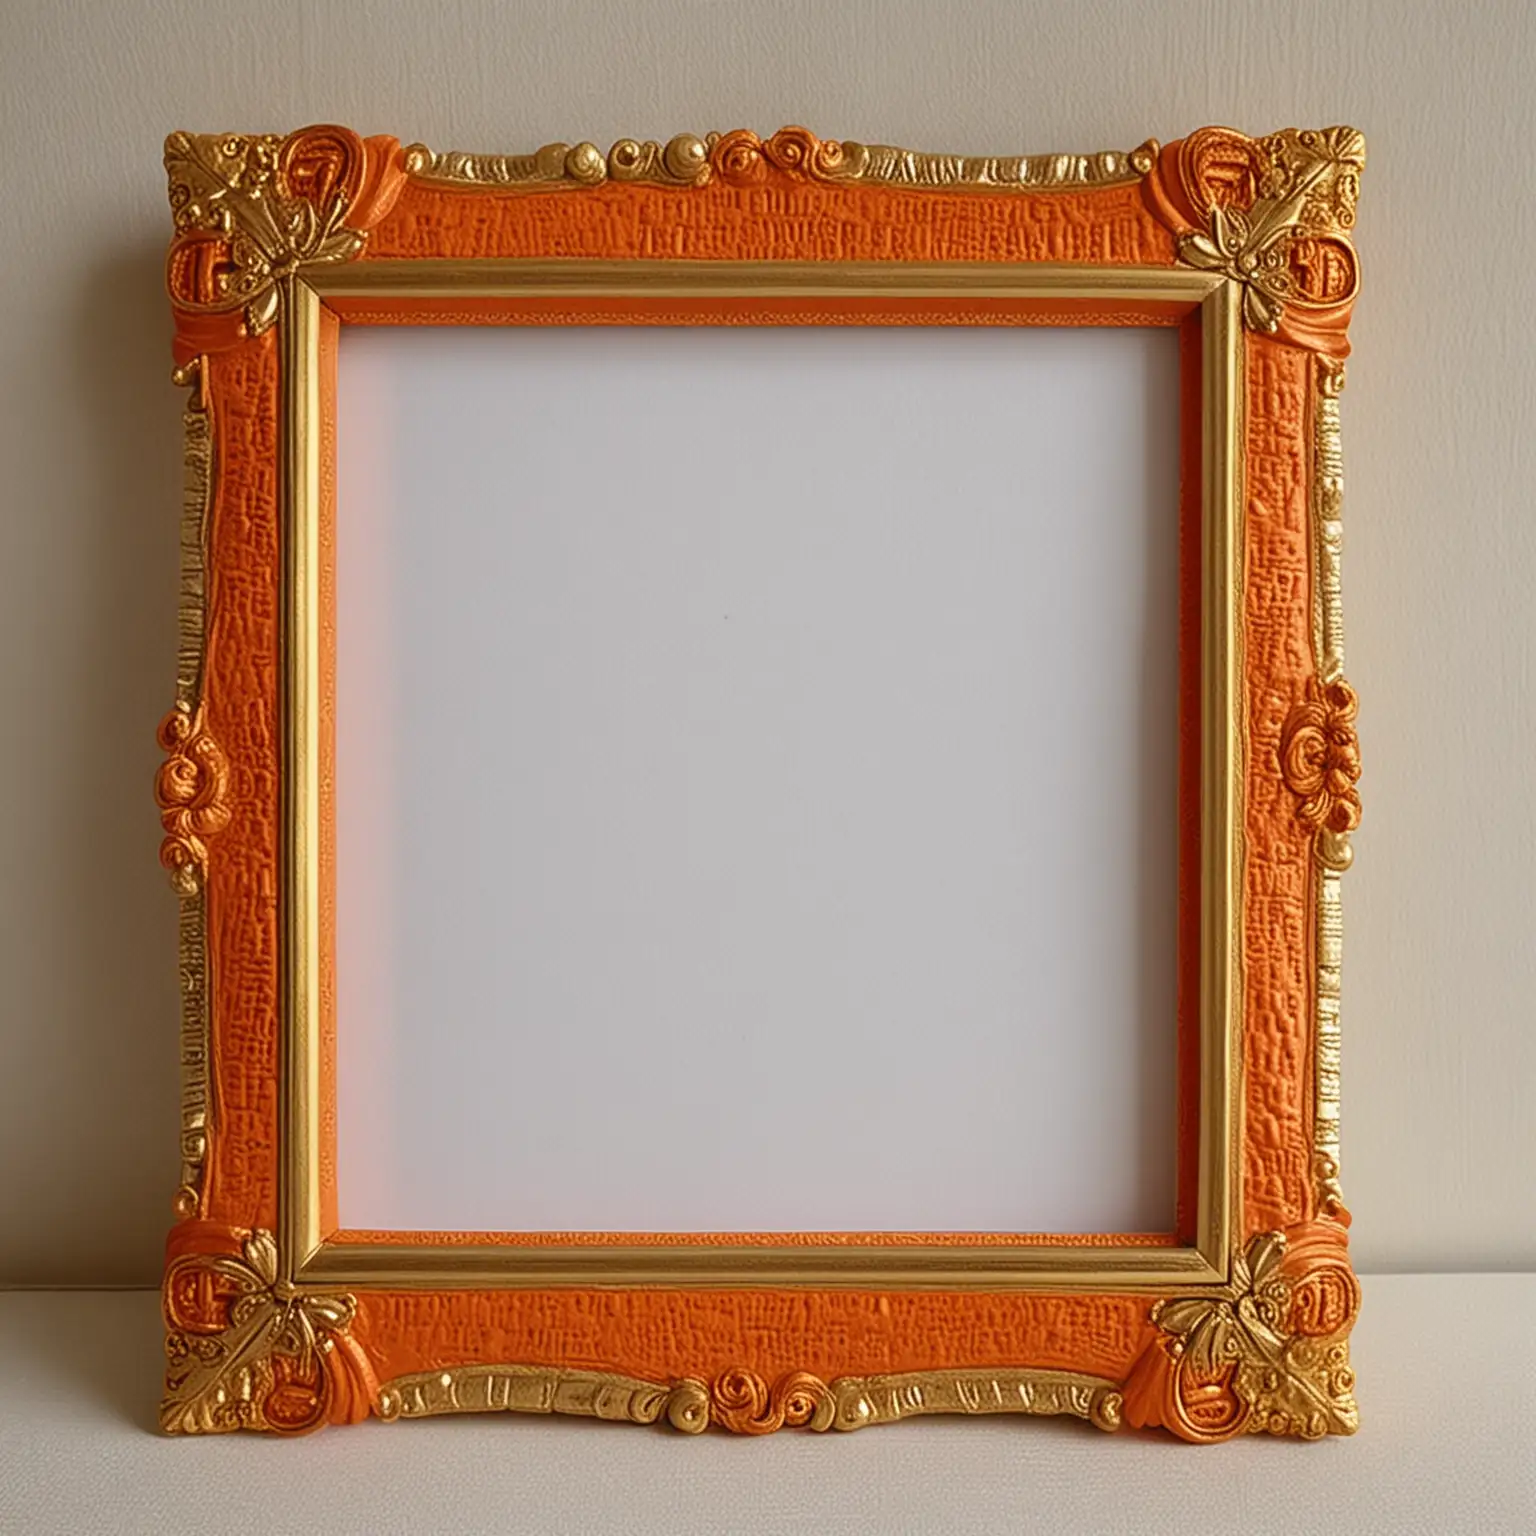 Elegant Orange and Gold Photo Frame with Floral Accents